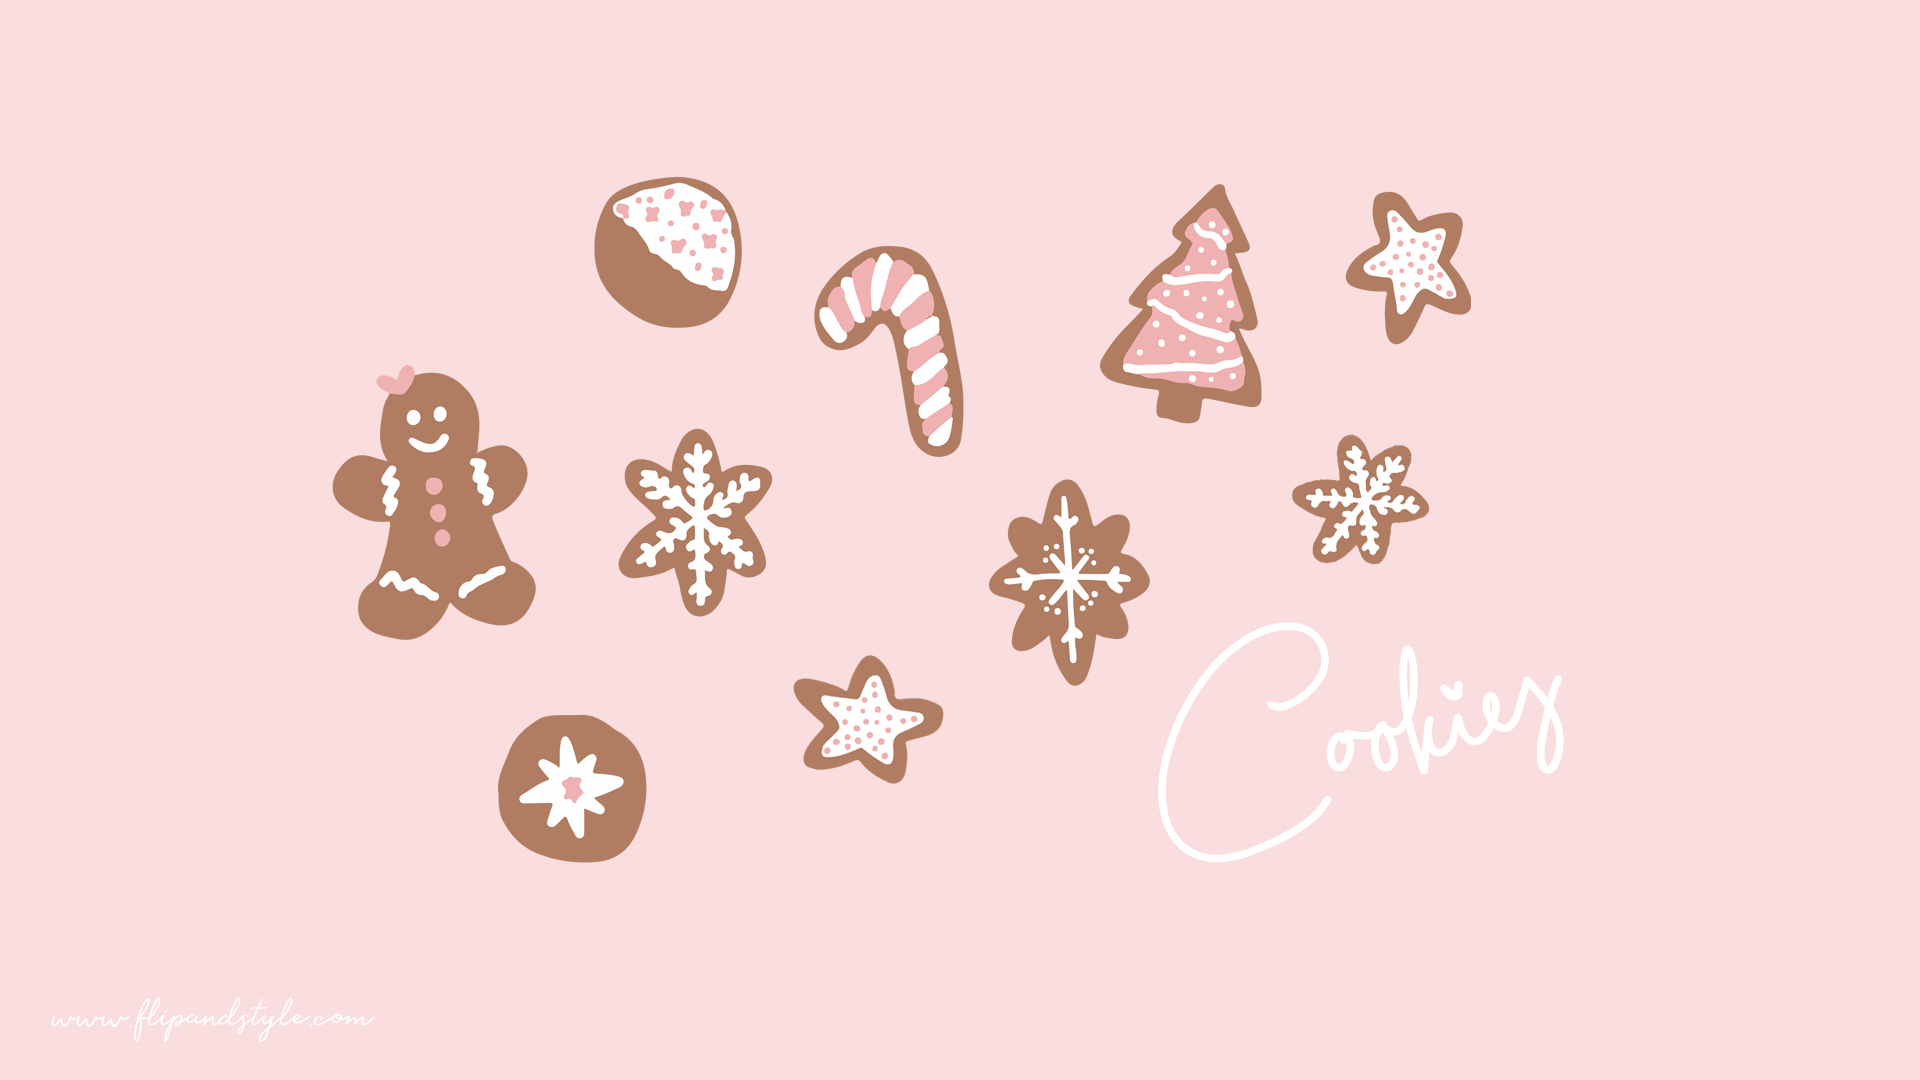 A festive holiday wallpaper featuring a gingerbread man, candy cane, and other holiday cookies on a soft pink background. Perfect for desktop or phone background. - Cute Christmas